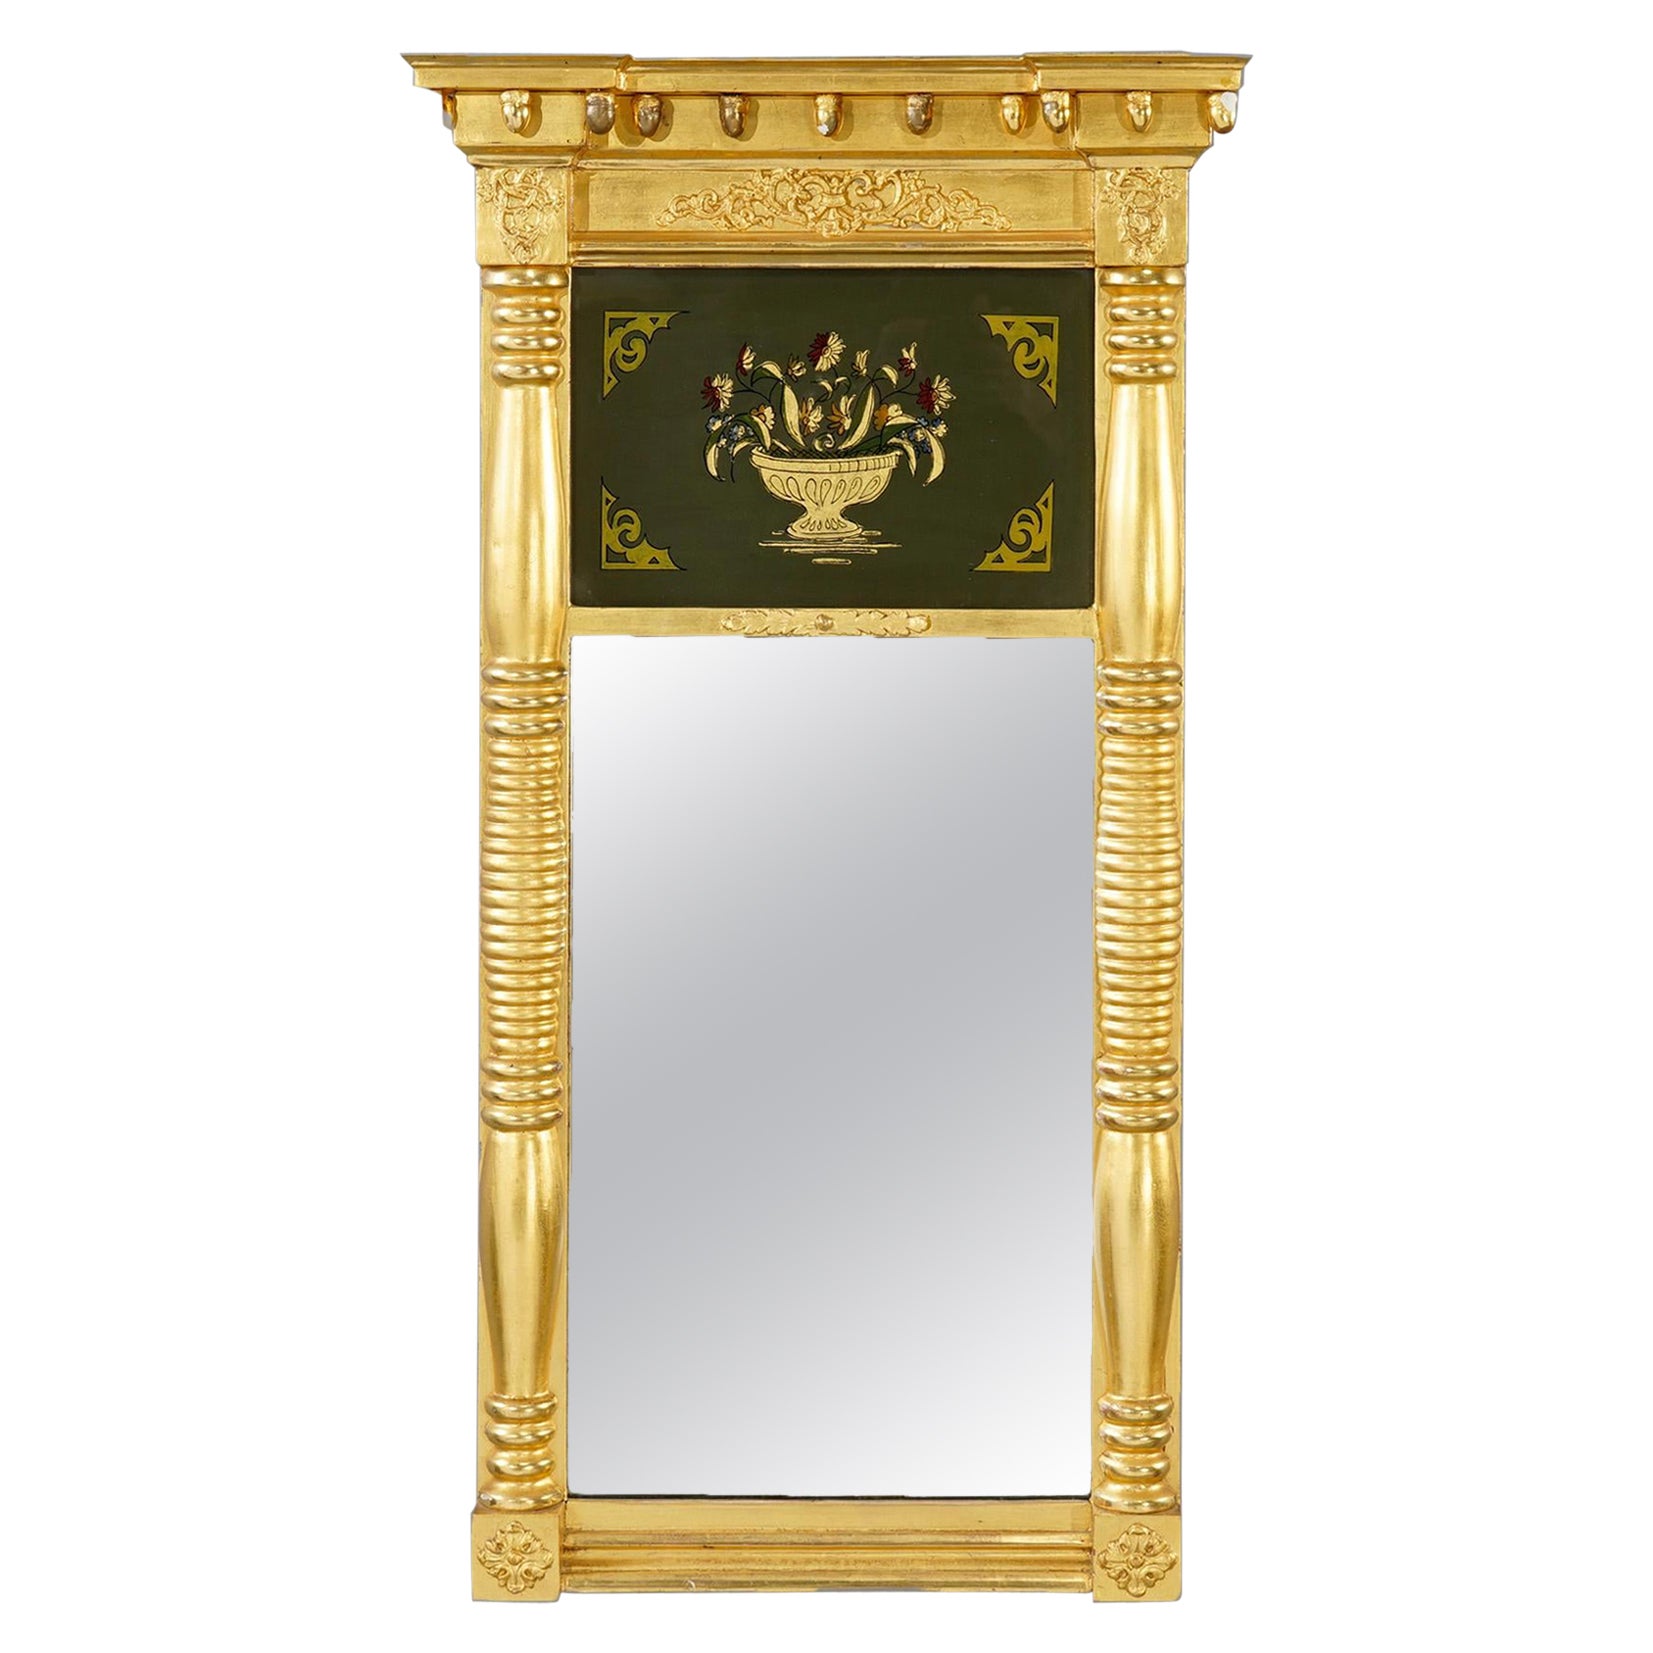 Antique Empire Reverse Painted Still Life Giltwood Trumeau Wall Mirror 19th C